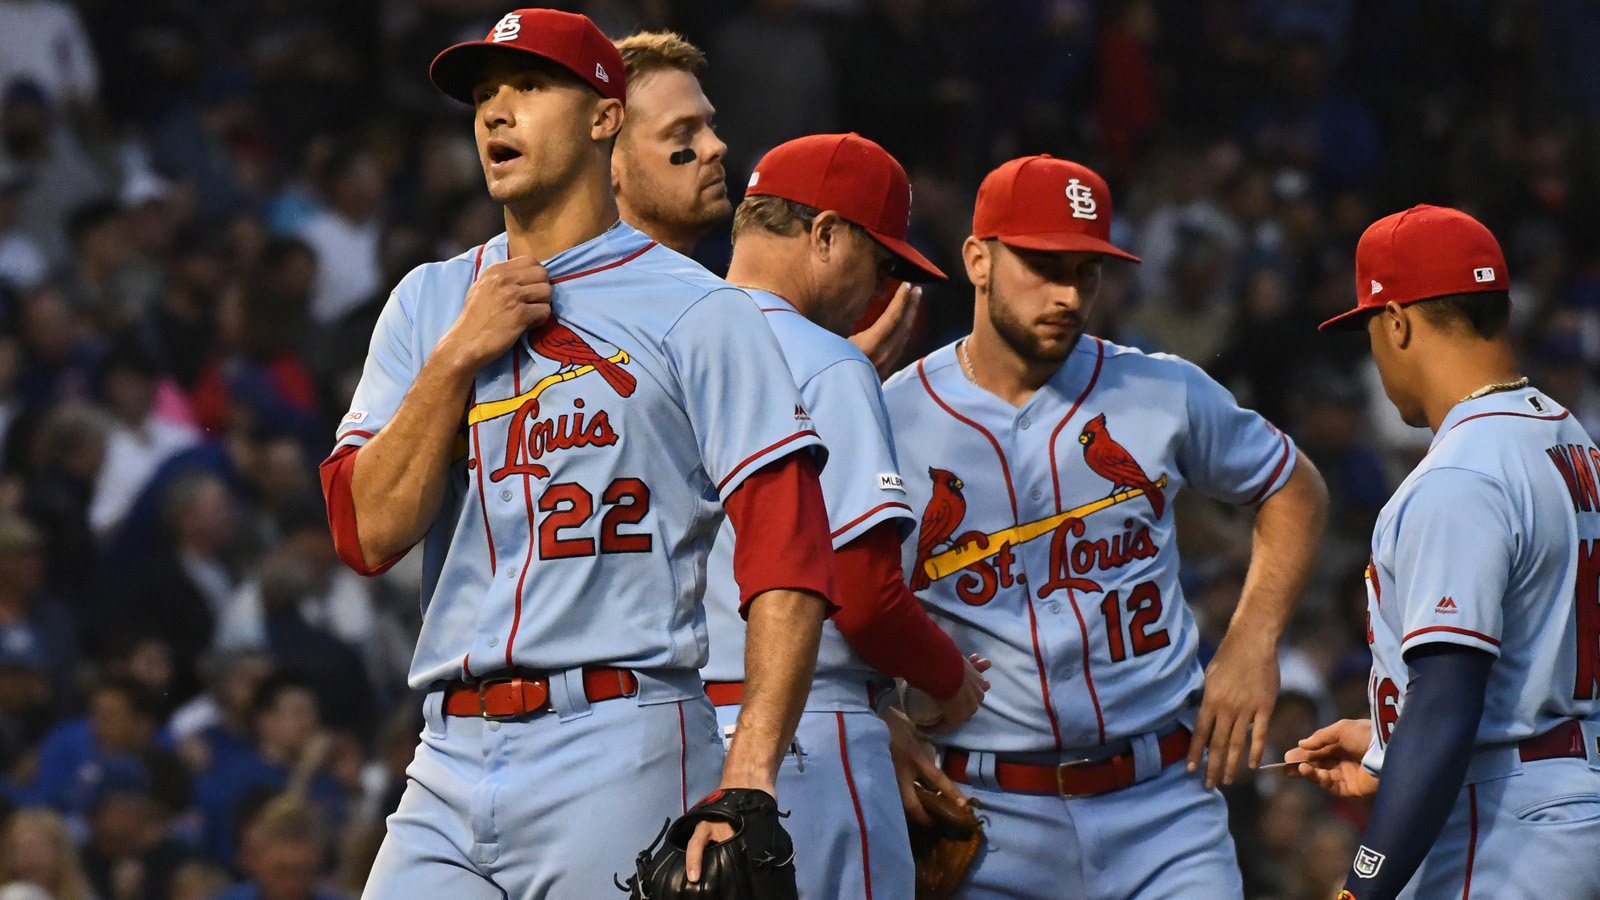 Cardinals' bats go cold after first inning in 9-4 loss to Cubs